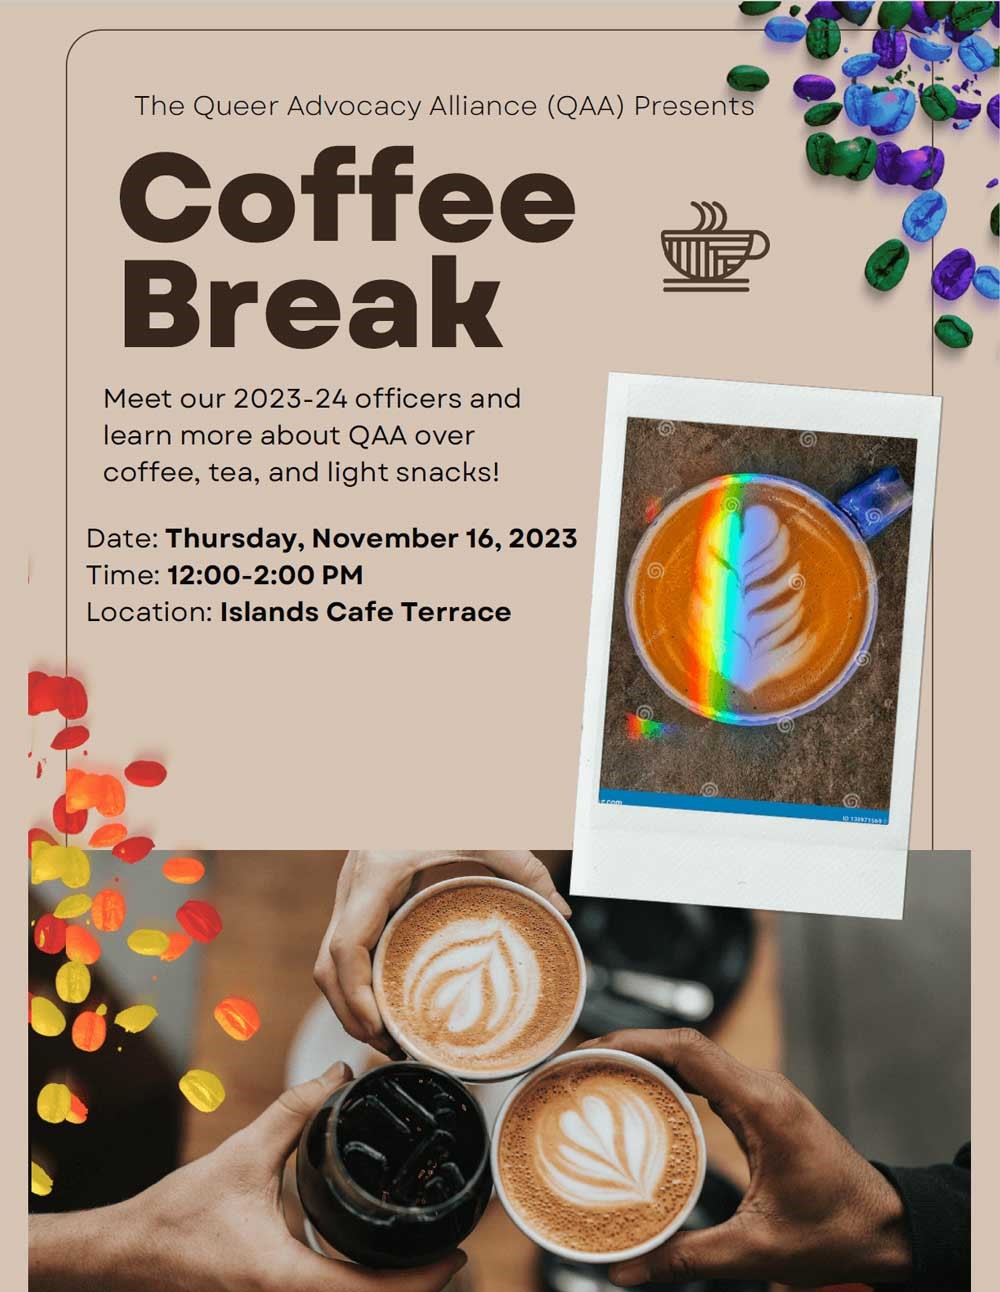 Event Flyer for QAA Coffee Break taking place on 11/16/23, from 12-2pm at the North Islands Cafe Terrace. 